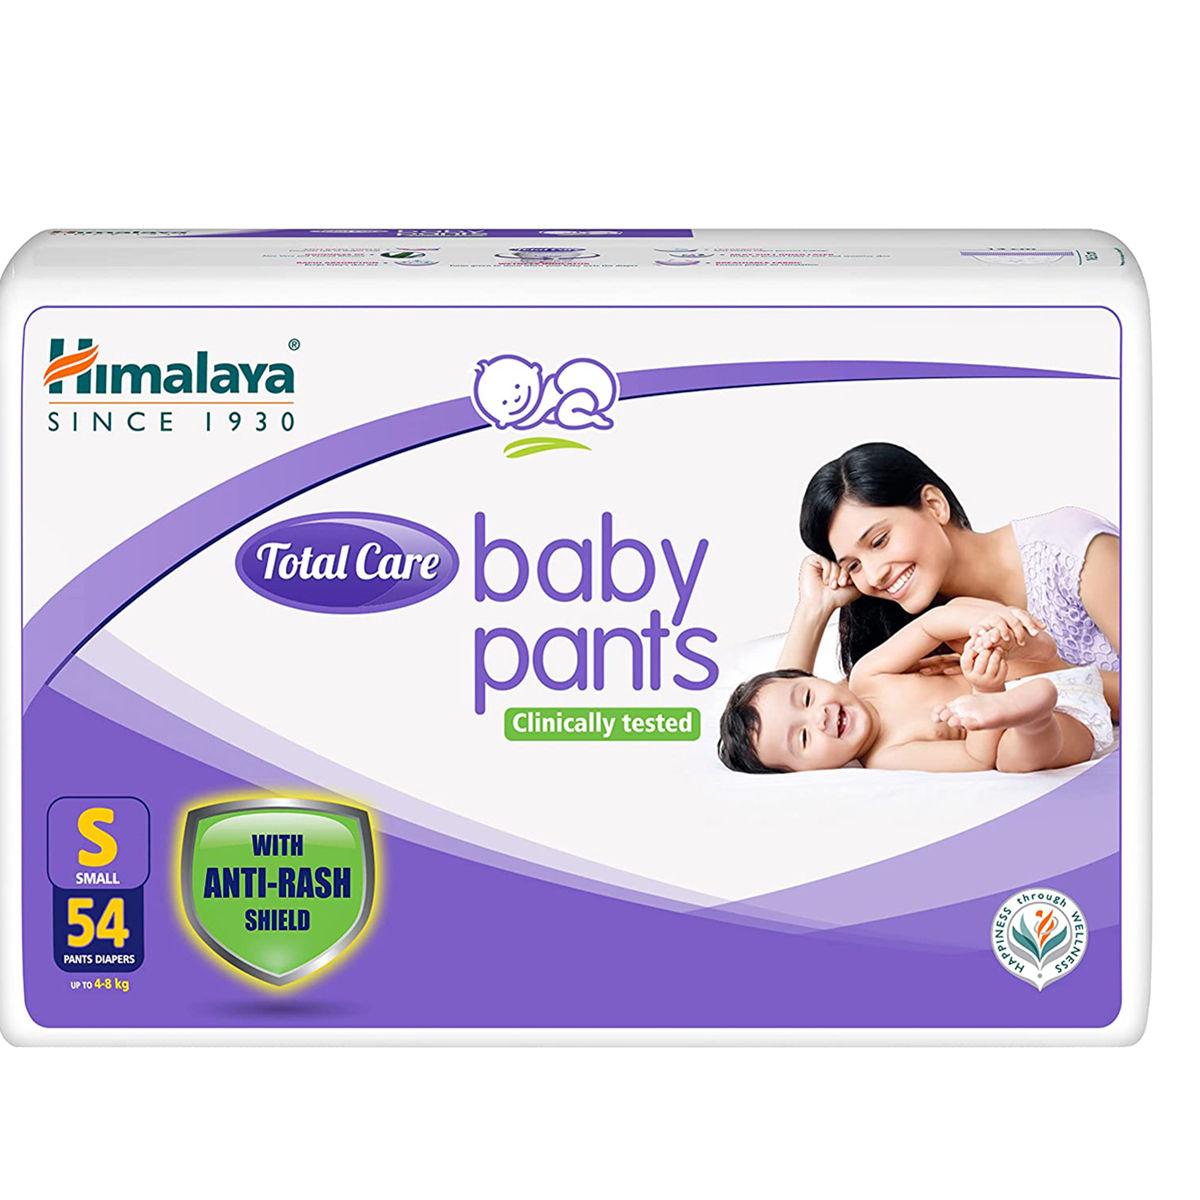 HIMALAYA TOTAL CARE BABY PANTS DIAPERSL76S IND